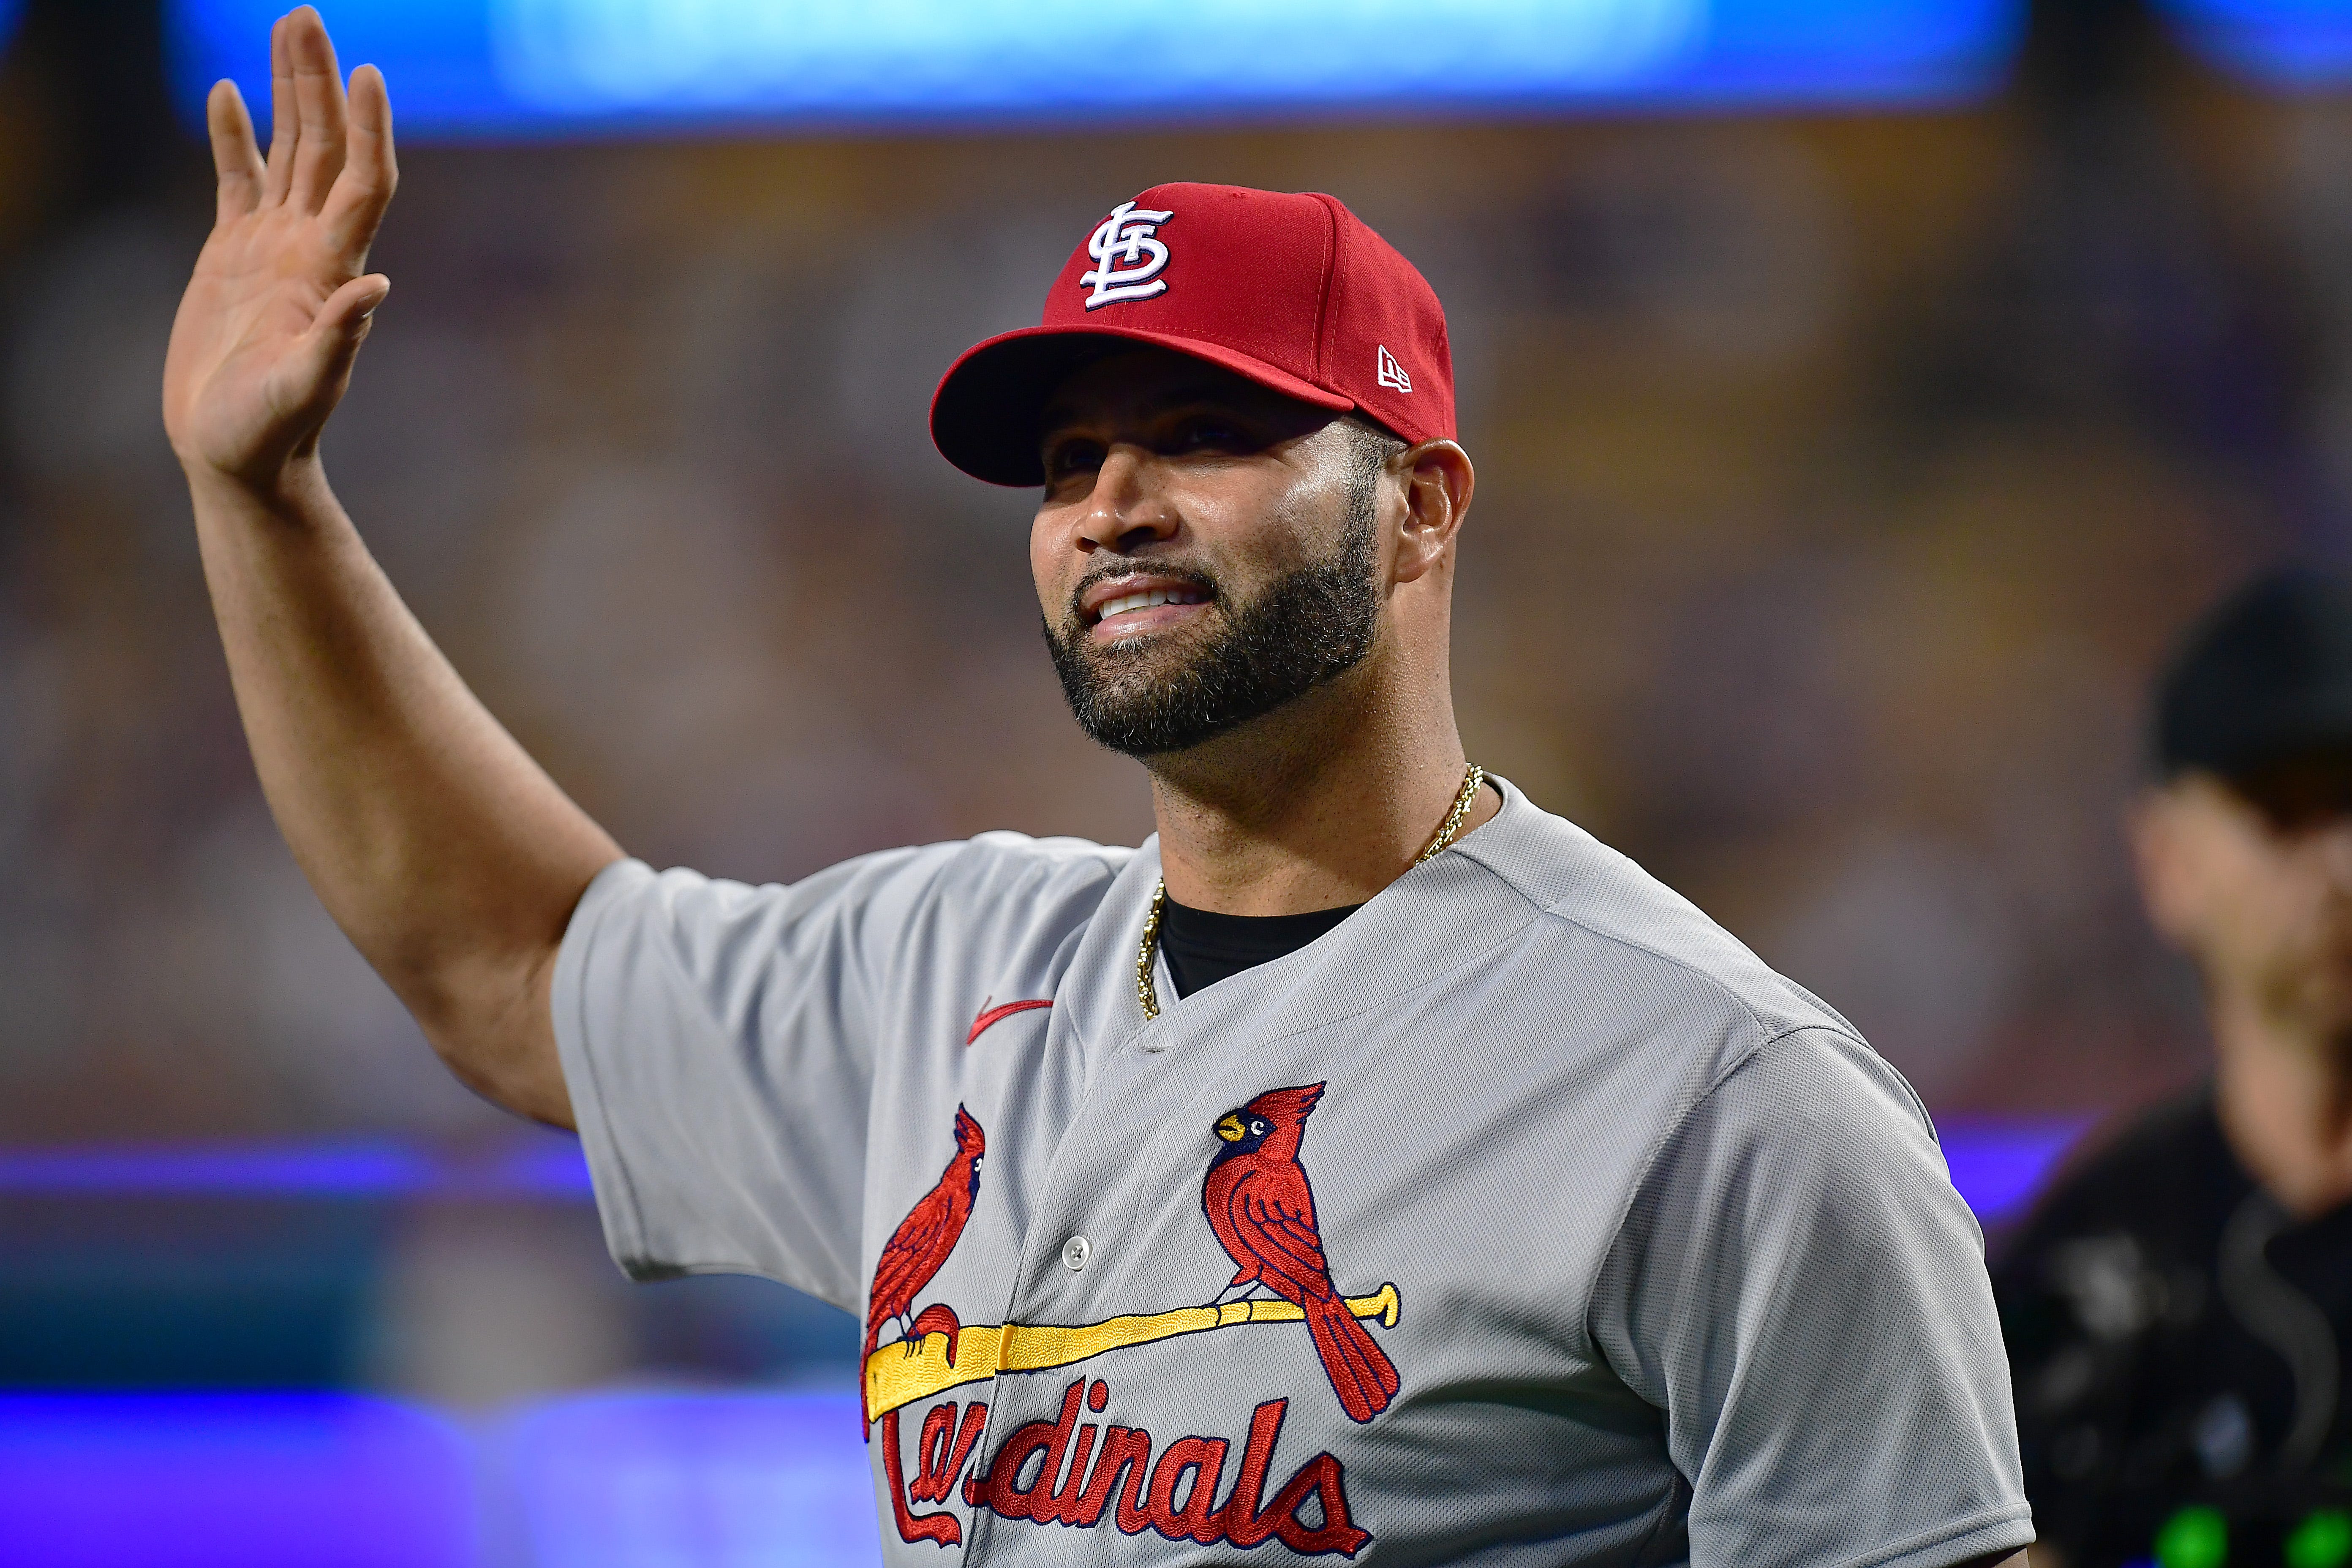 'The Dodgers believed in me': Nothing but love as Albert Pujols joins 700 club vs. former team